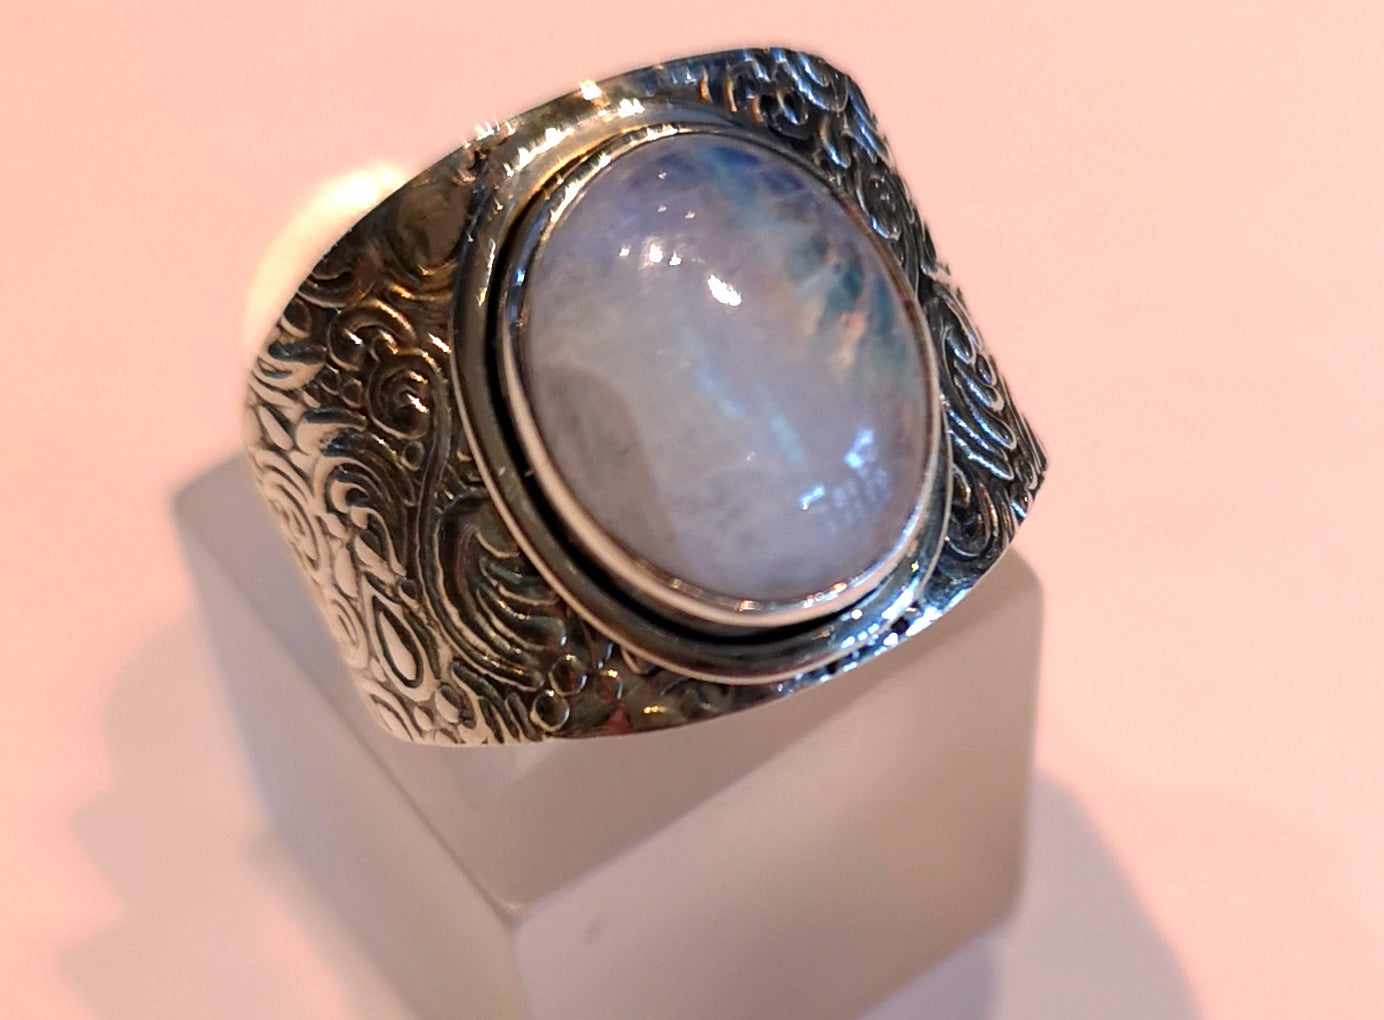 Rainbow moonstone ring in sterling silver.